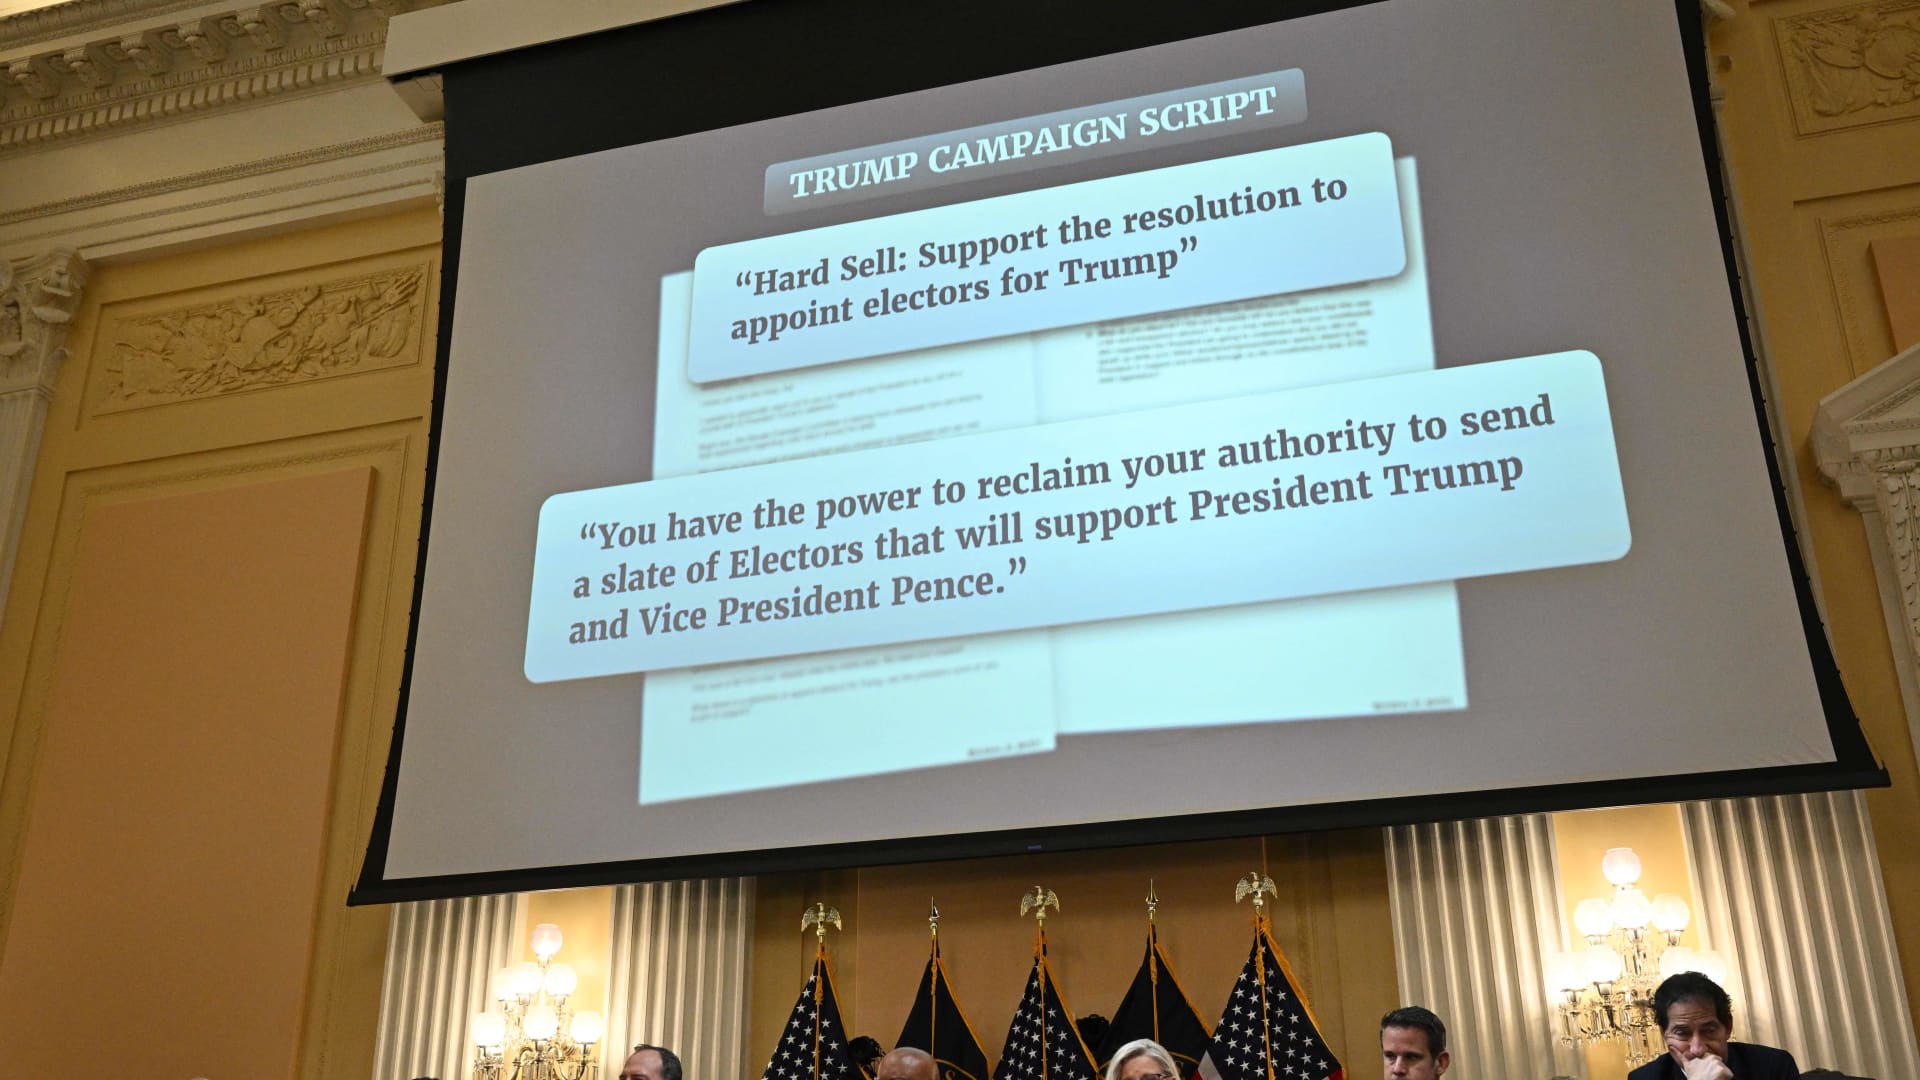 An image of Former President Donald Trump campaign script is displayed on a screen during the fourth hearing by the House Select Committee to Investigate the January 6th Attack on the US Capitol in the Cannon House Office Building on June 21, 2022 in Washington, DC.